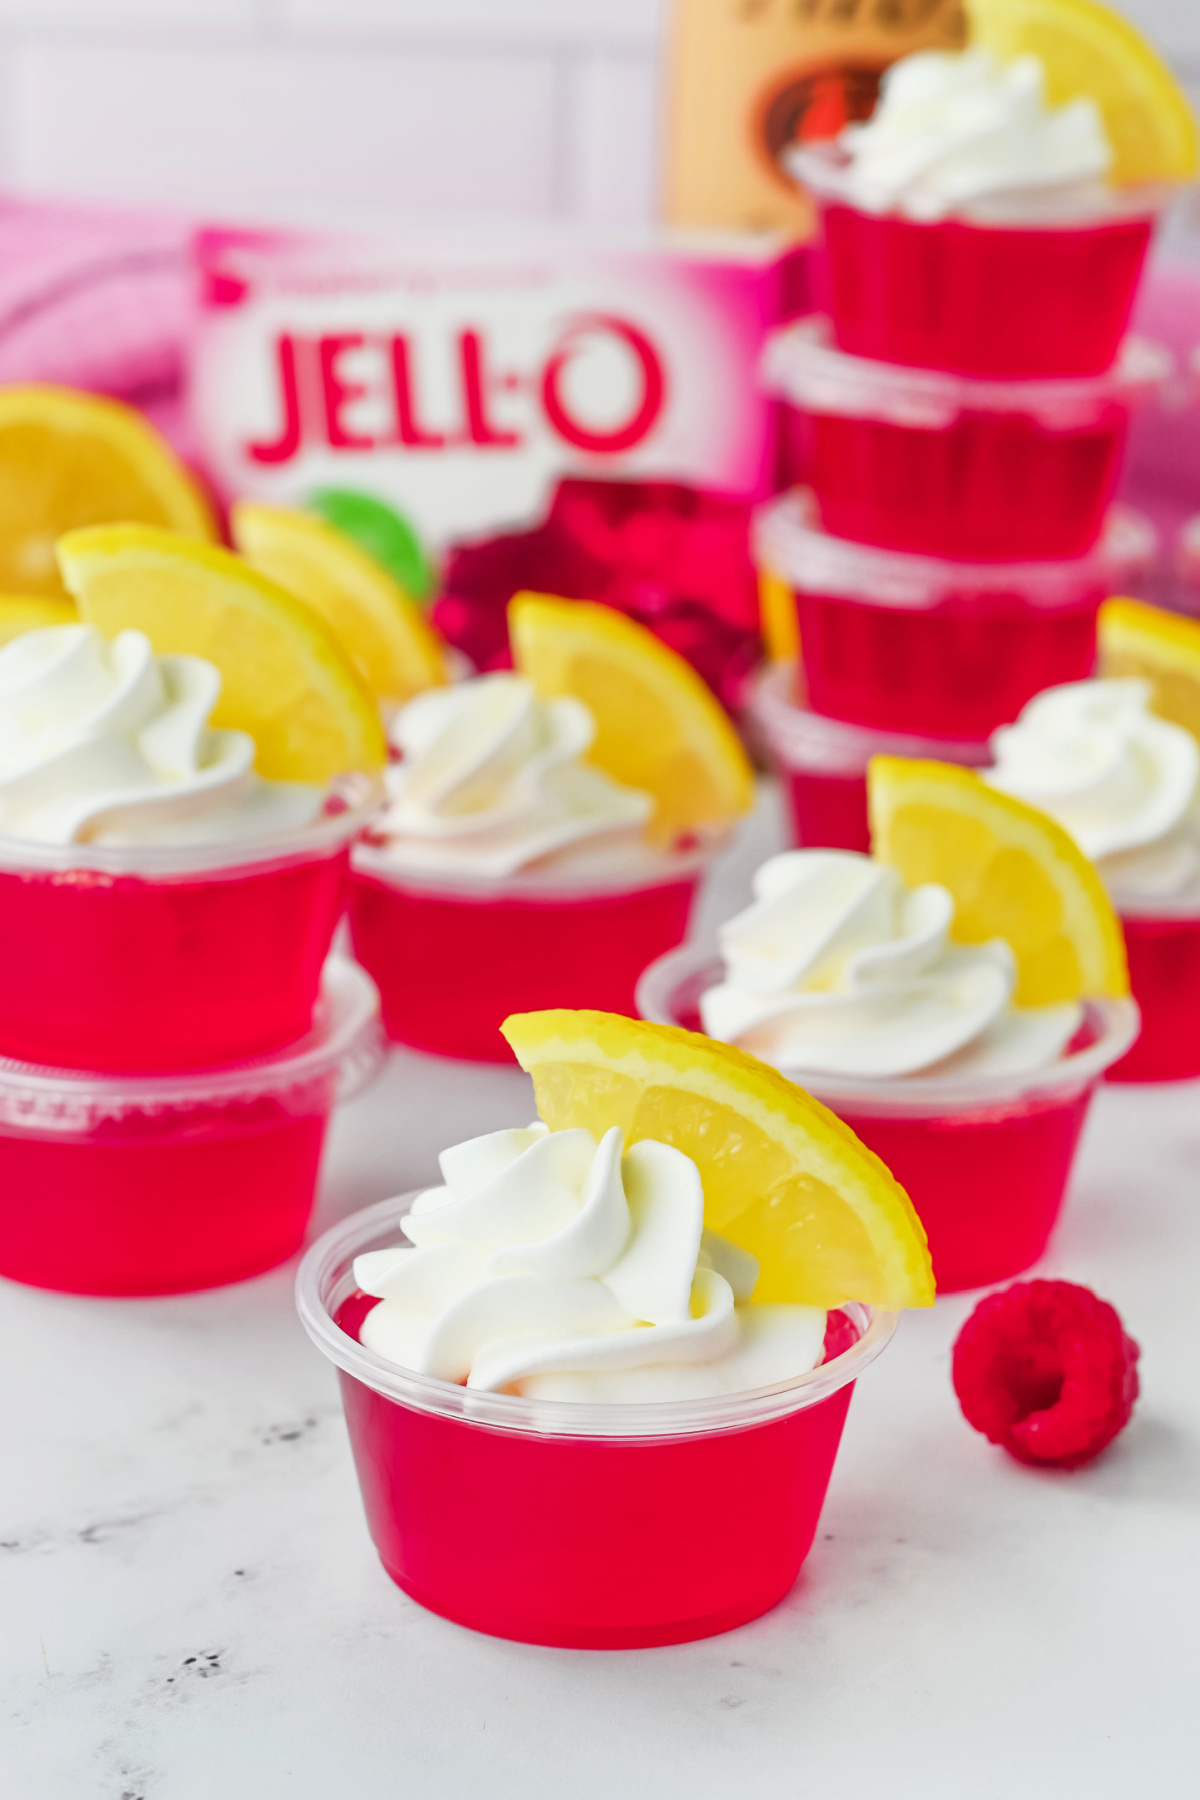 Jello cups with lemon slices and whipped cream.